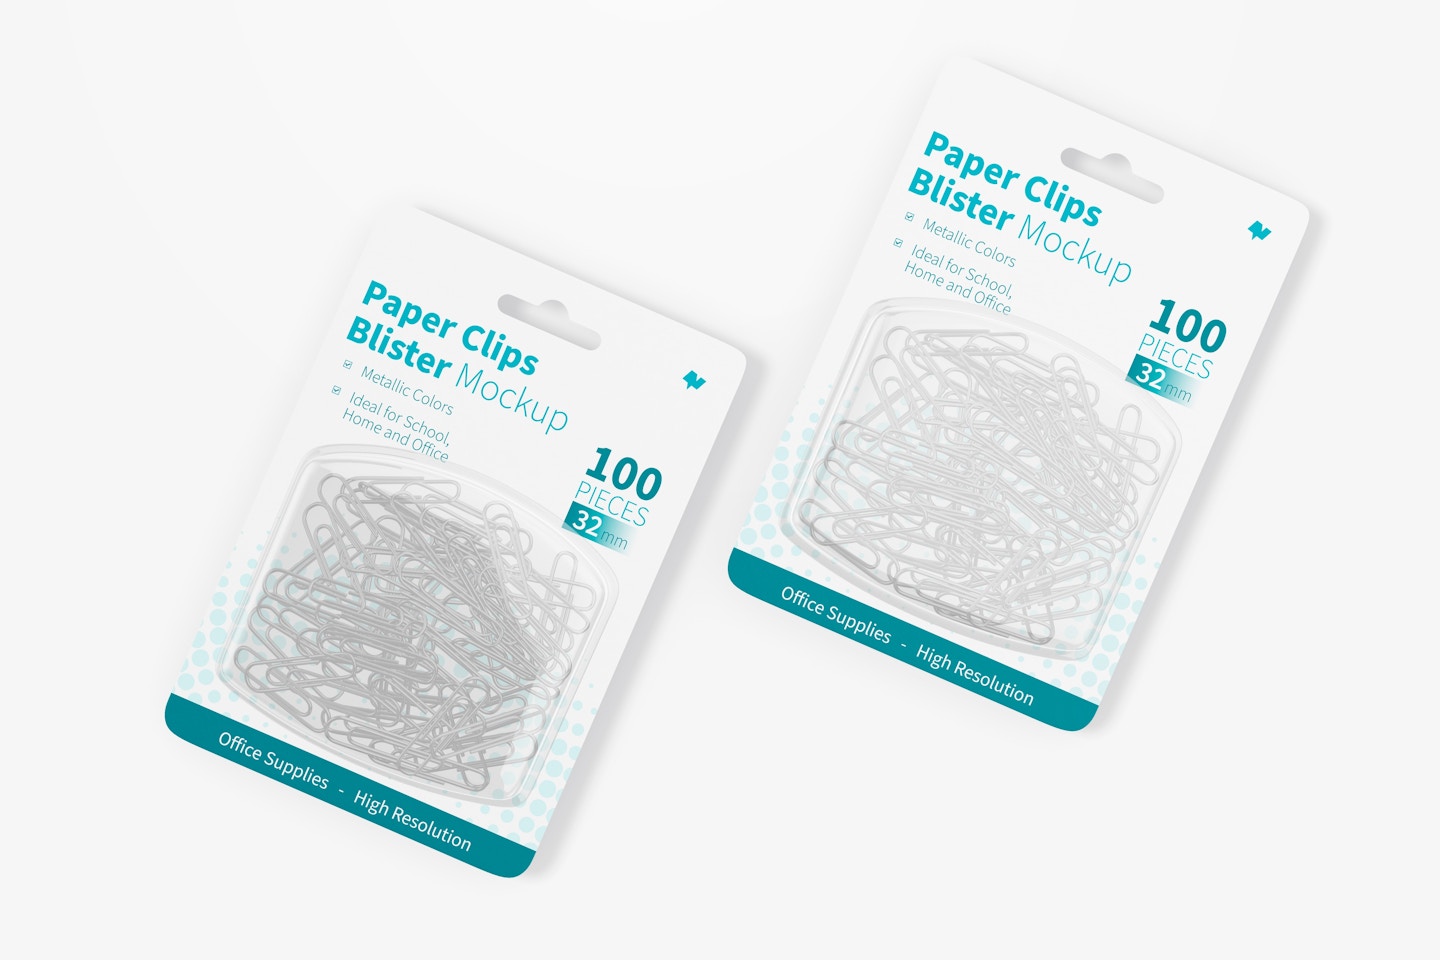 Paper Clips Blisters Mockup